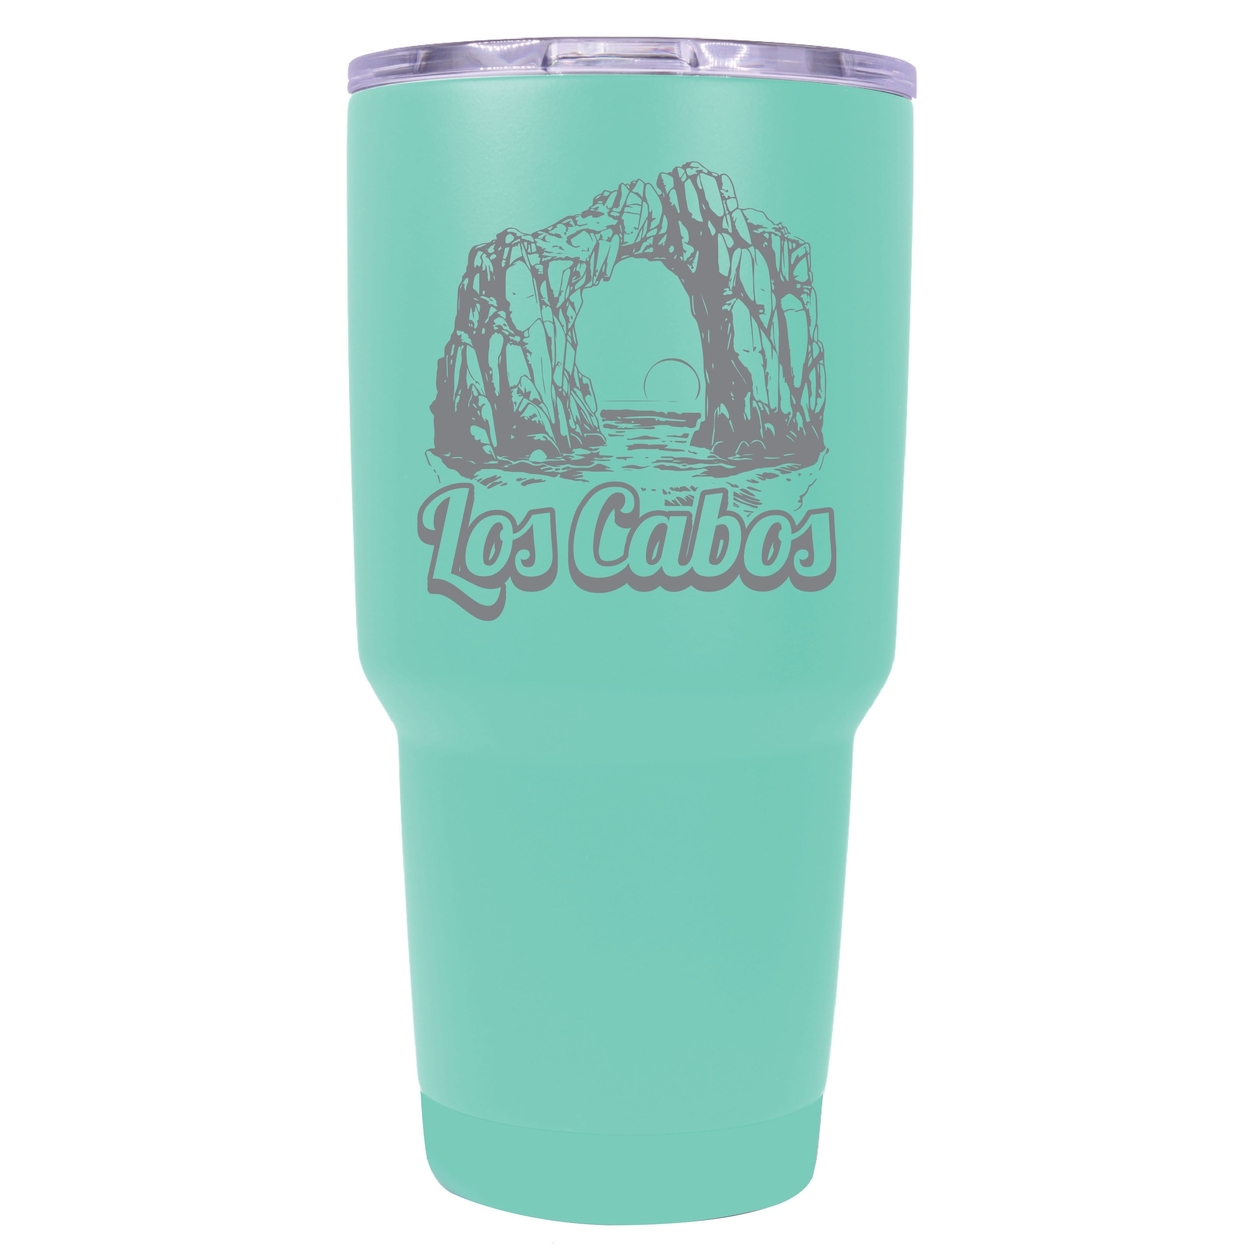 Los Cabos Mexico Souvenir 24 Oz Engraved Insulated Stainless Steel Tumbler - Rose Gold,,Single Unit